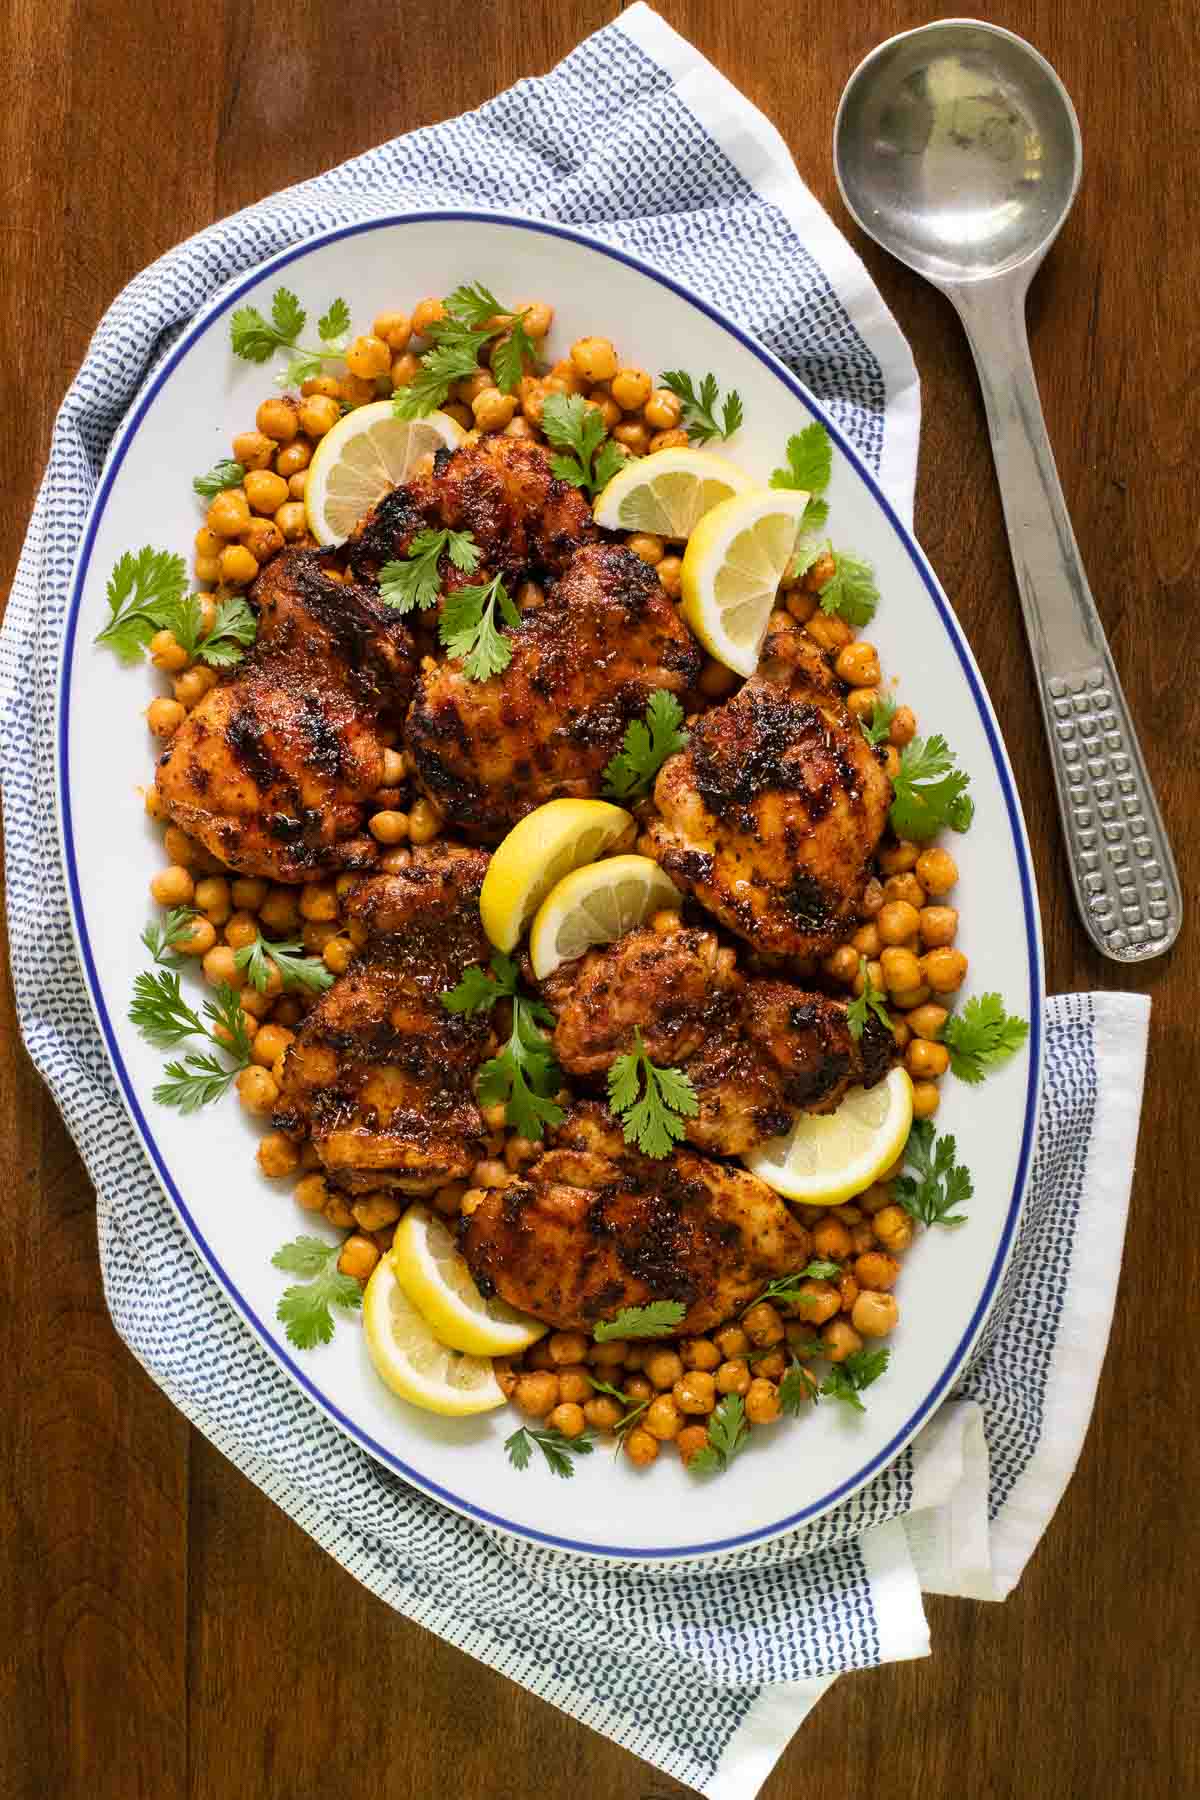  Overhead vertical photo of a presentation platter filled with Charred Honey Lemon Grilled Chicken with Crispy Chickpeas in a blue and white serving platter on a wood table.